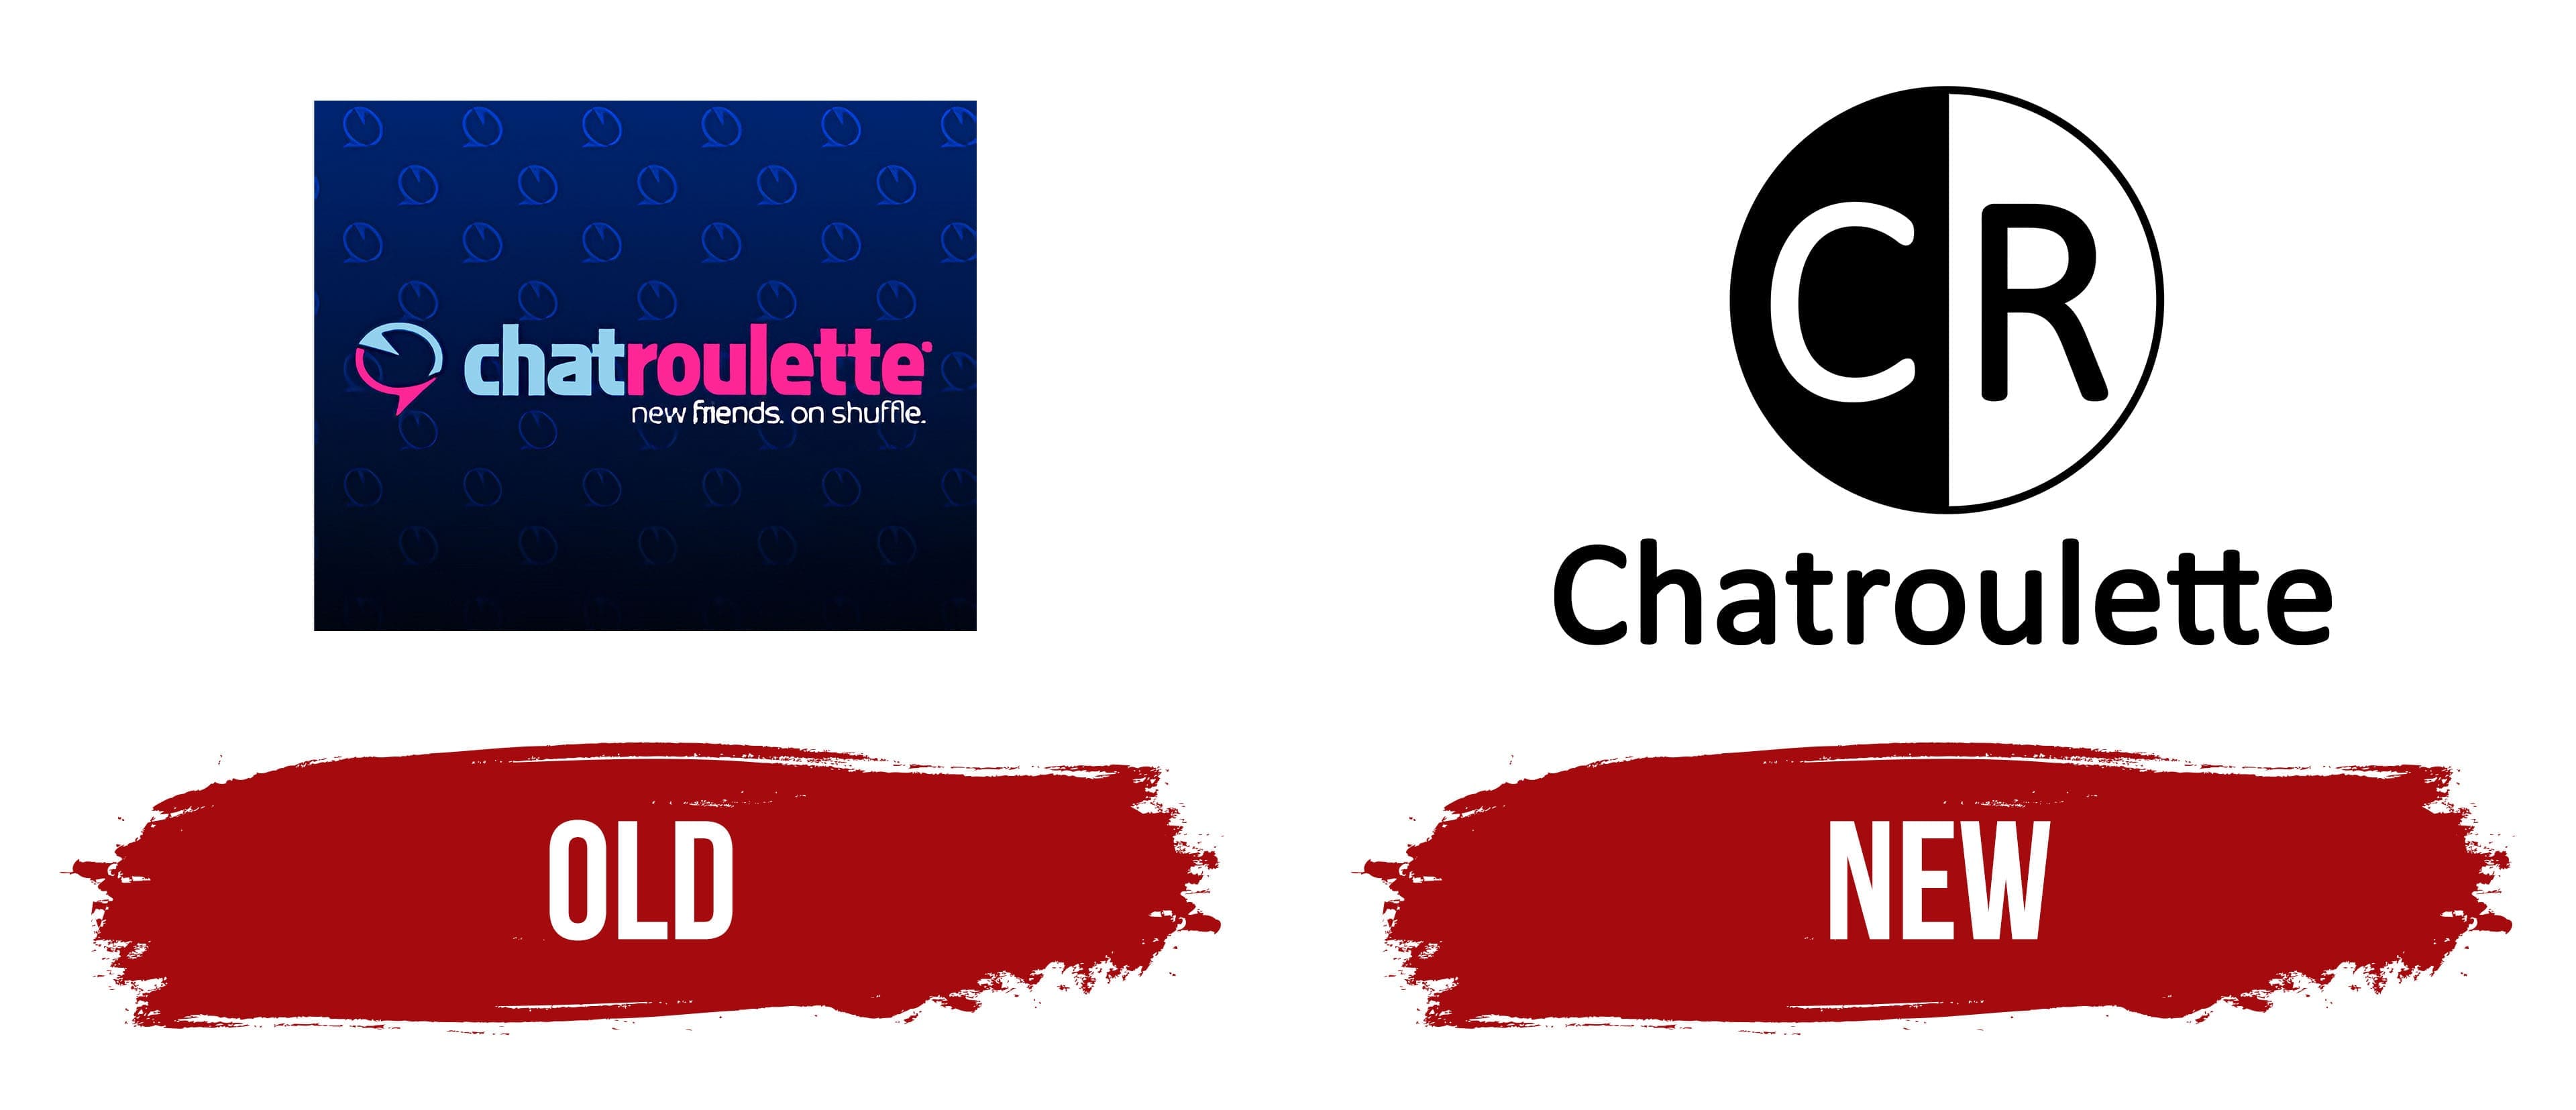 Chat rulet on